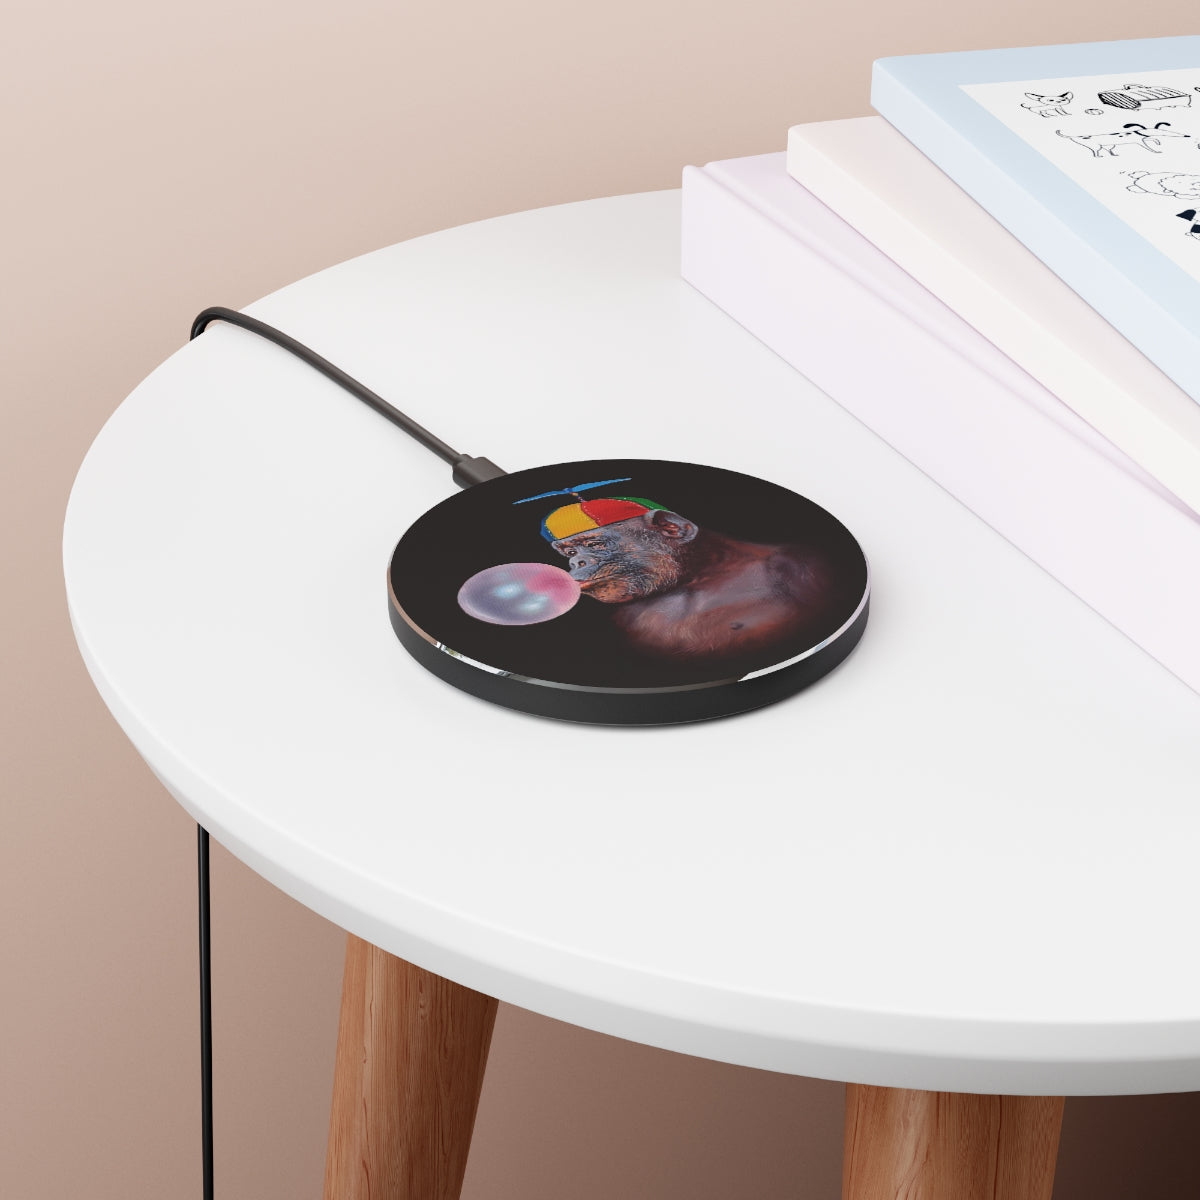 Tony South: "Inflatet" Wireless Charger